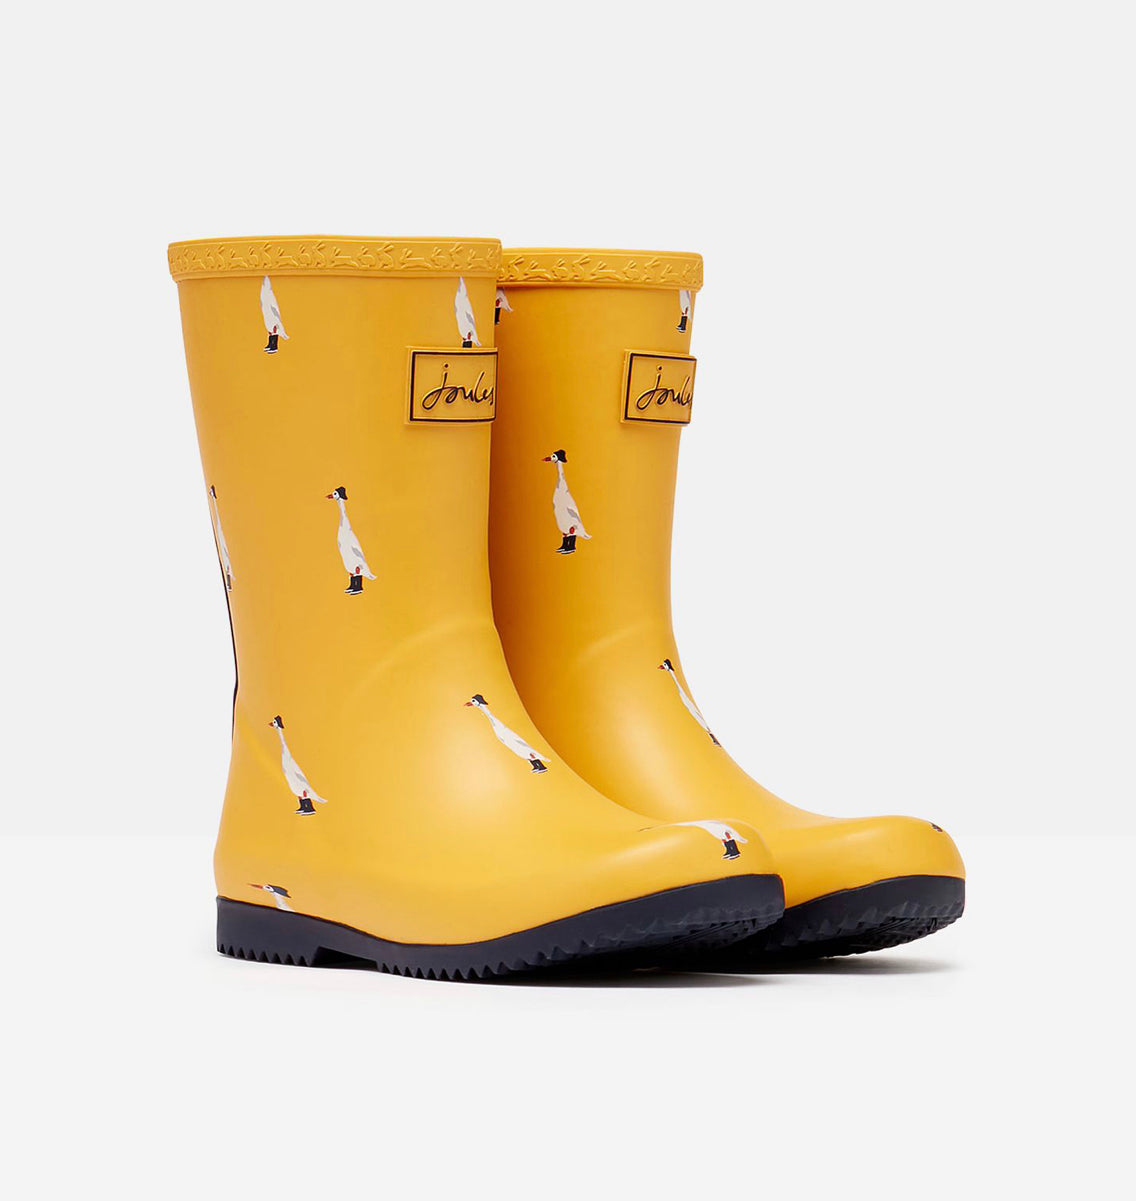 Joules Gold Duck Roll up wellies